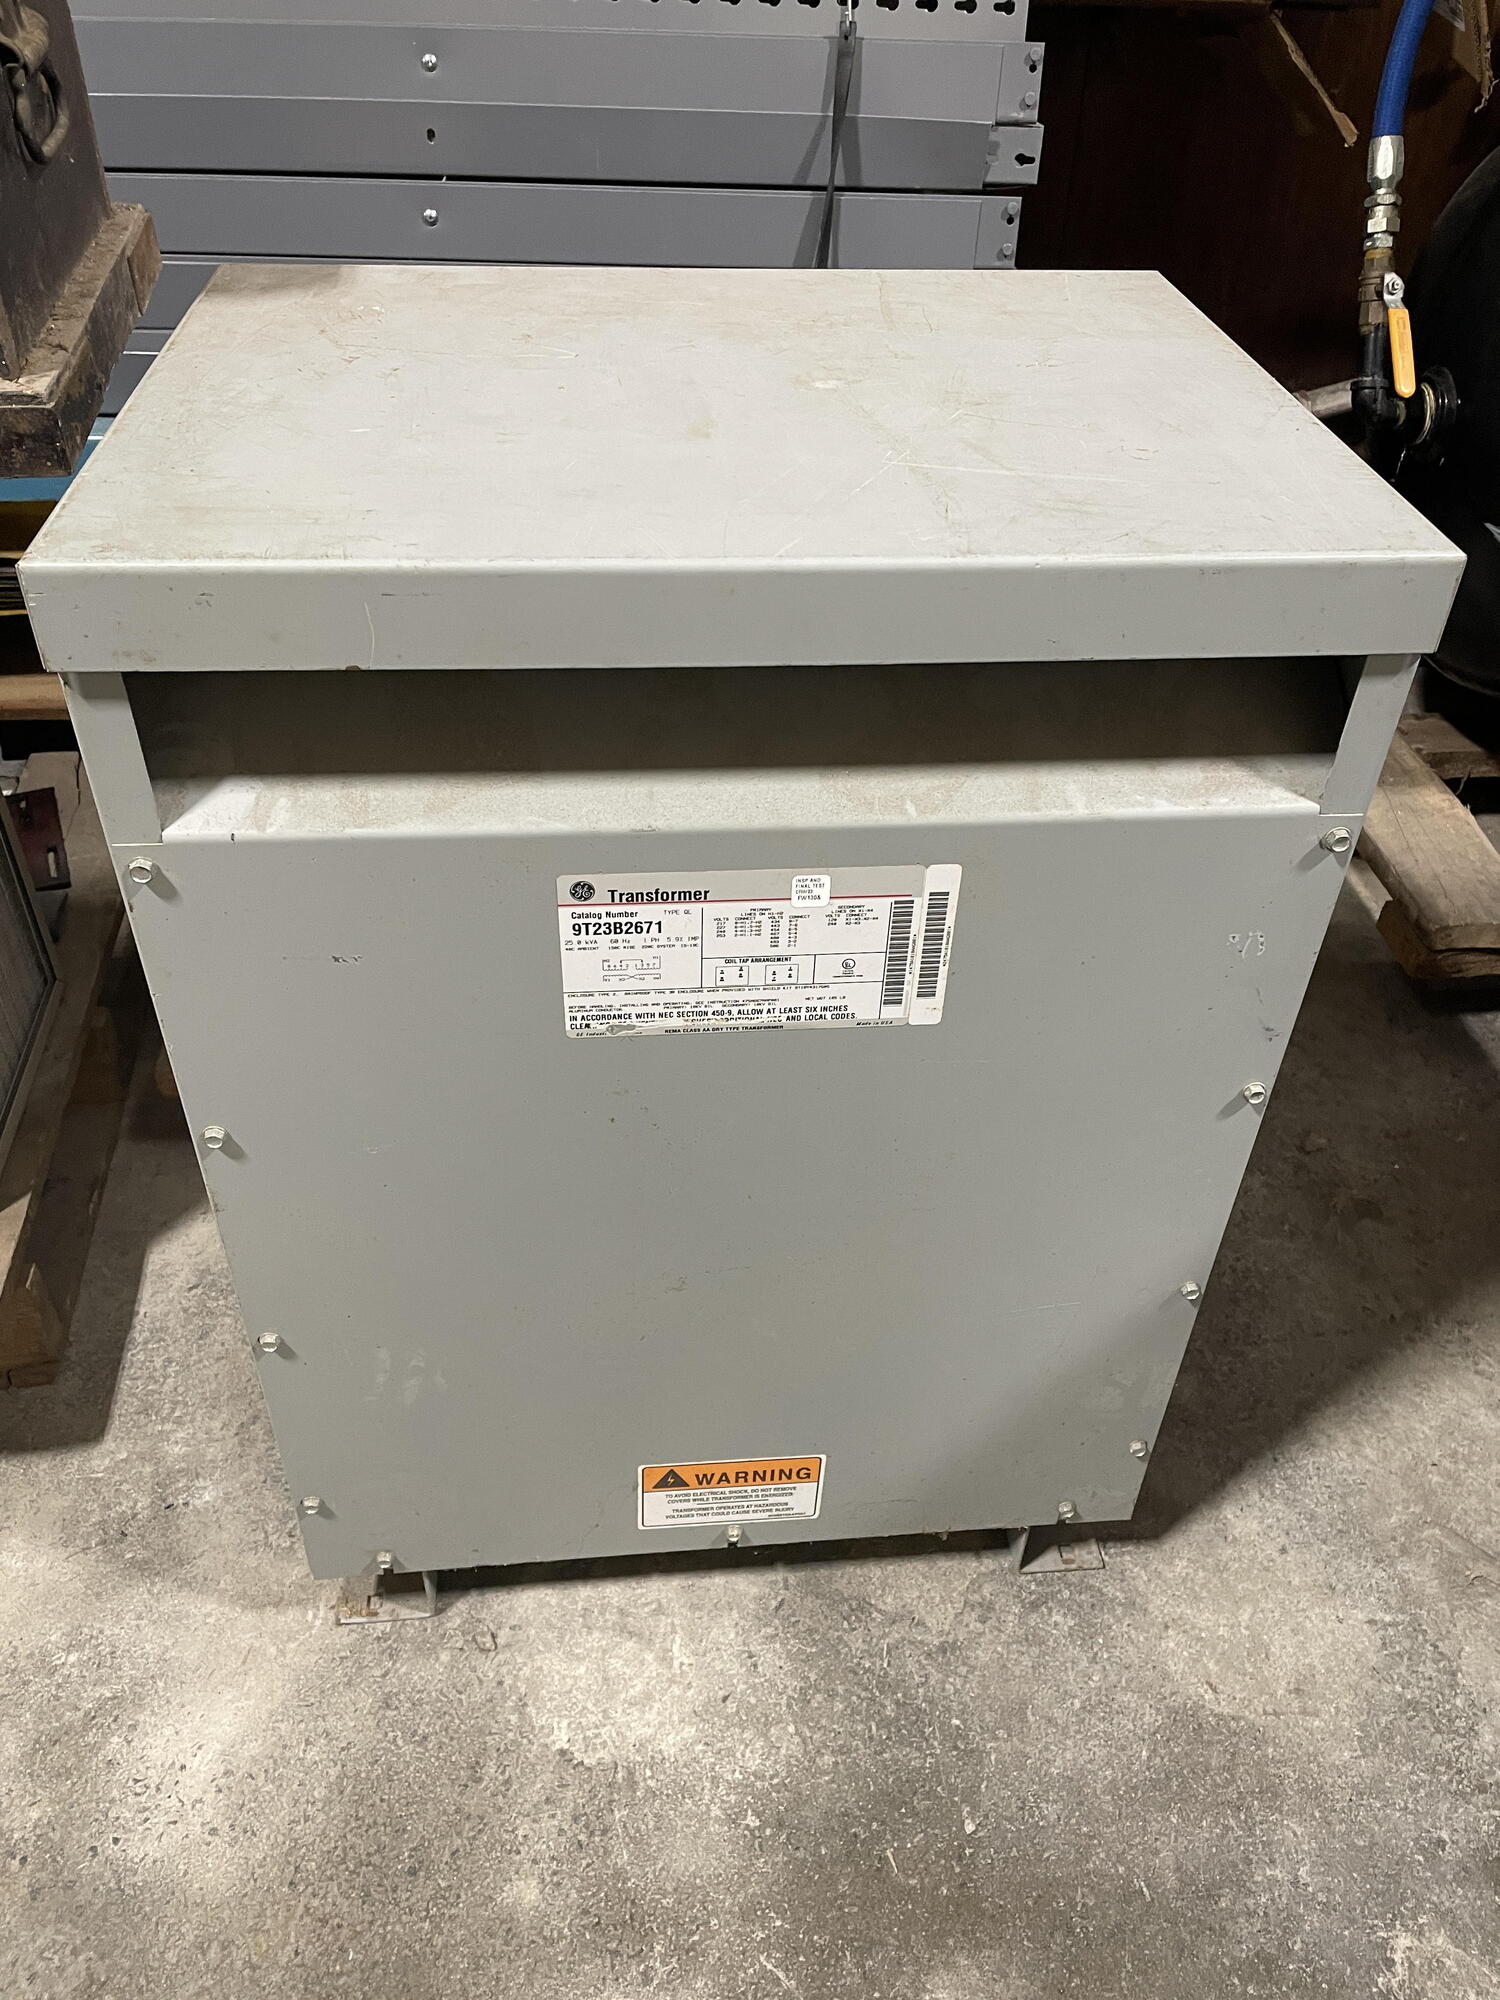 GE 9T23B2671 Electrical Equipment, 1-Phase Transformers | New England Industrial Machinery